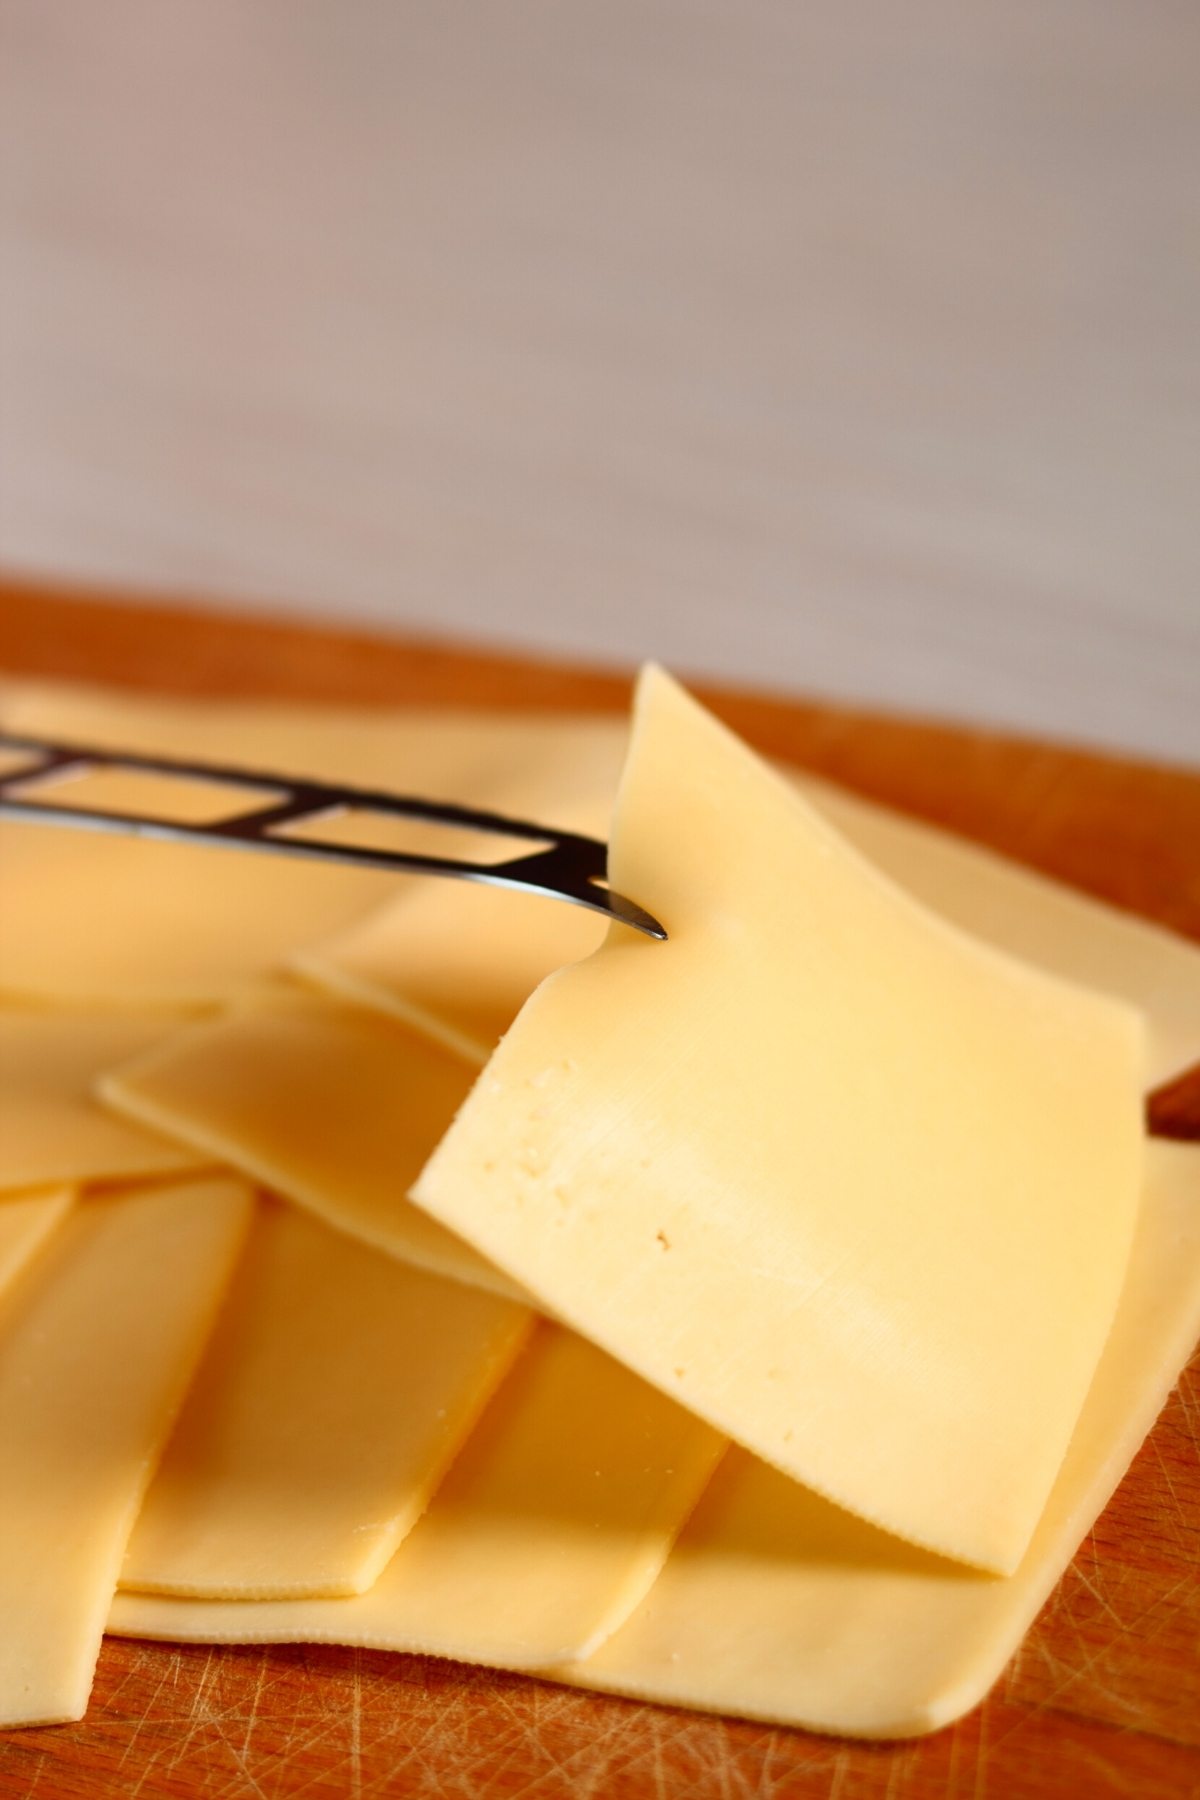 If you love to eat cheese you’ve probably tasted both white and yellow American cheese. Both are delicious and can be enjoyed on their own, in sandwiches, on charcuterie boards and in cooked dishes.